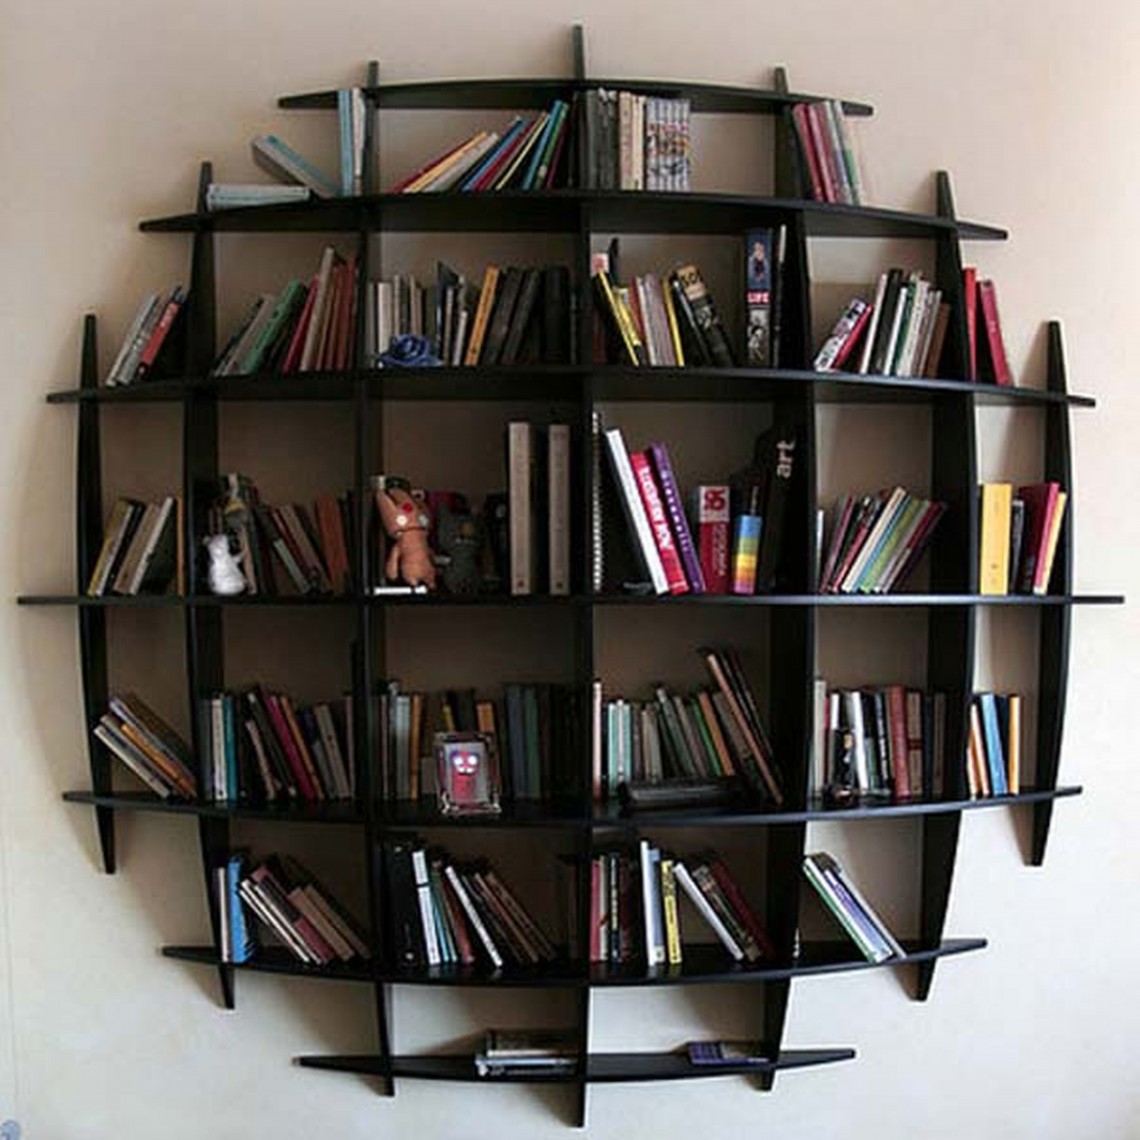 Excellent examples of a wall mounted bookshelves - Interior Design